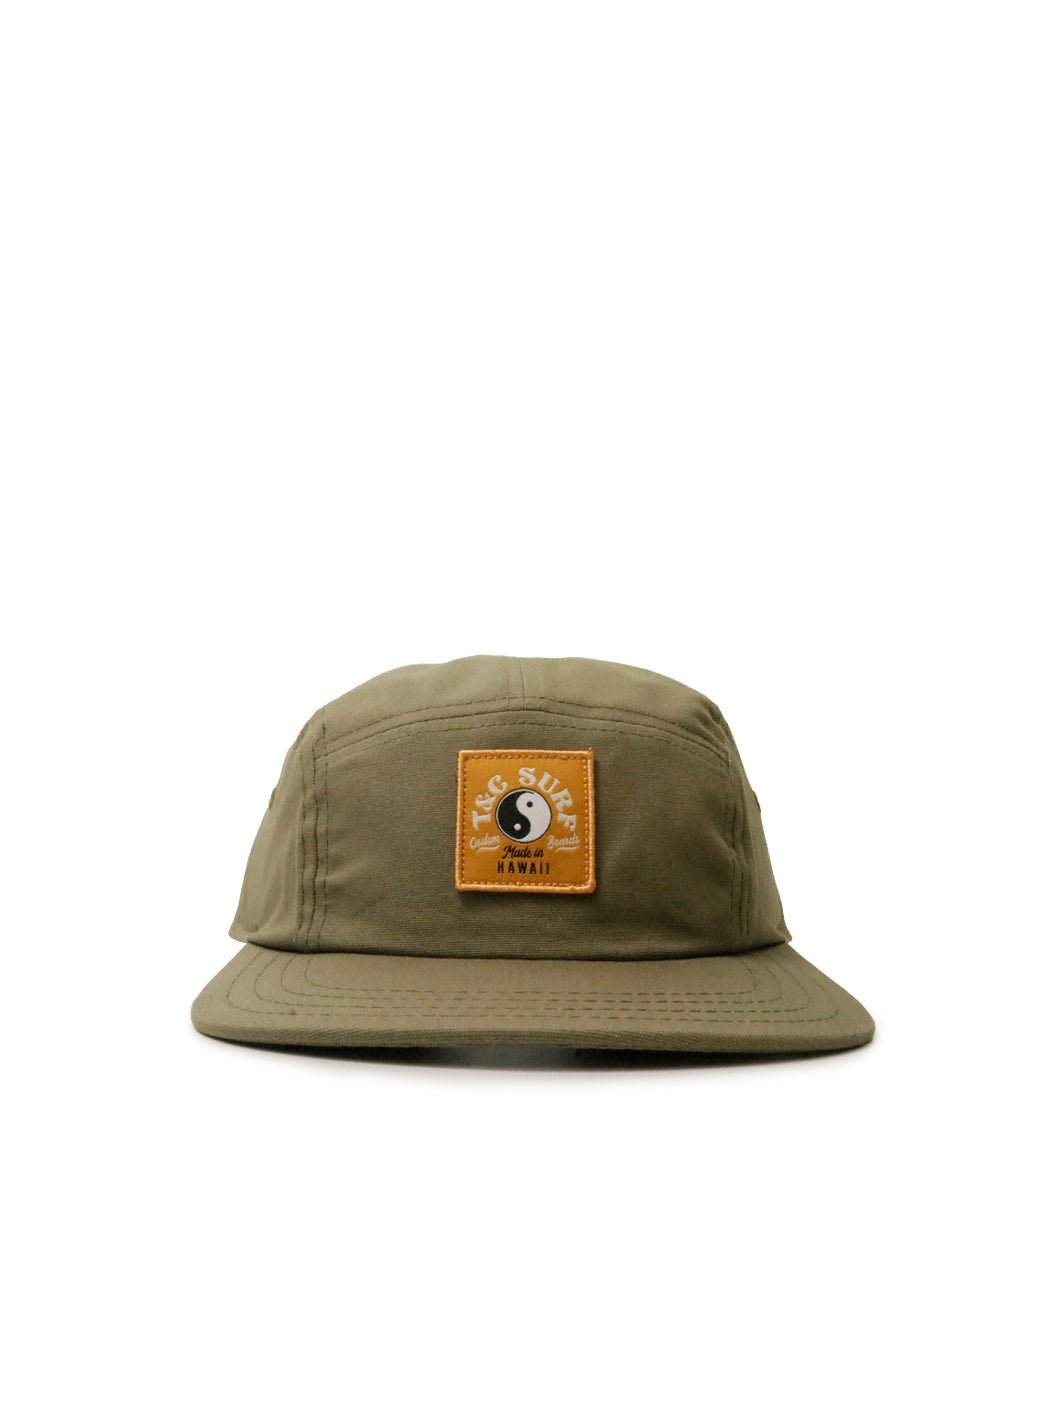 T&C Surf Designs T&C Surf Made In Hawaii Cap, Olive